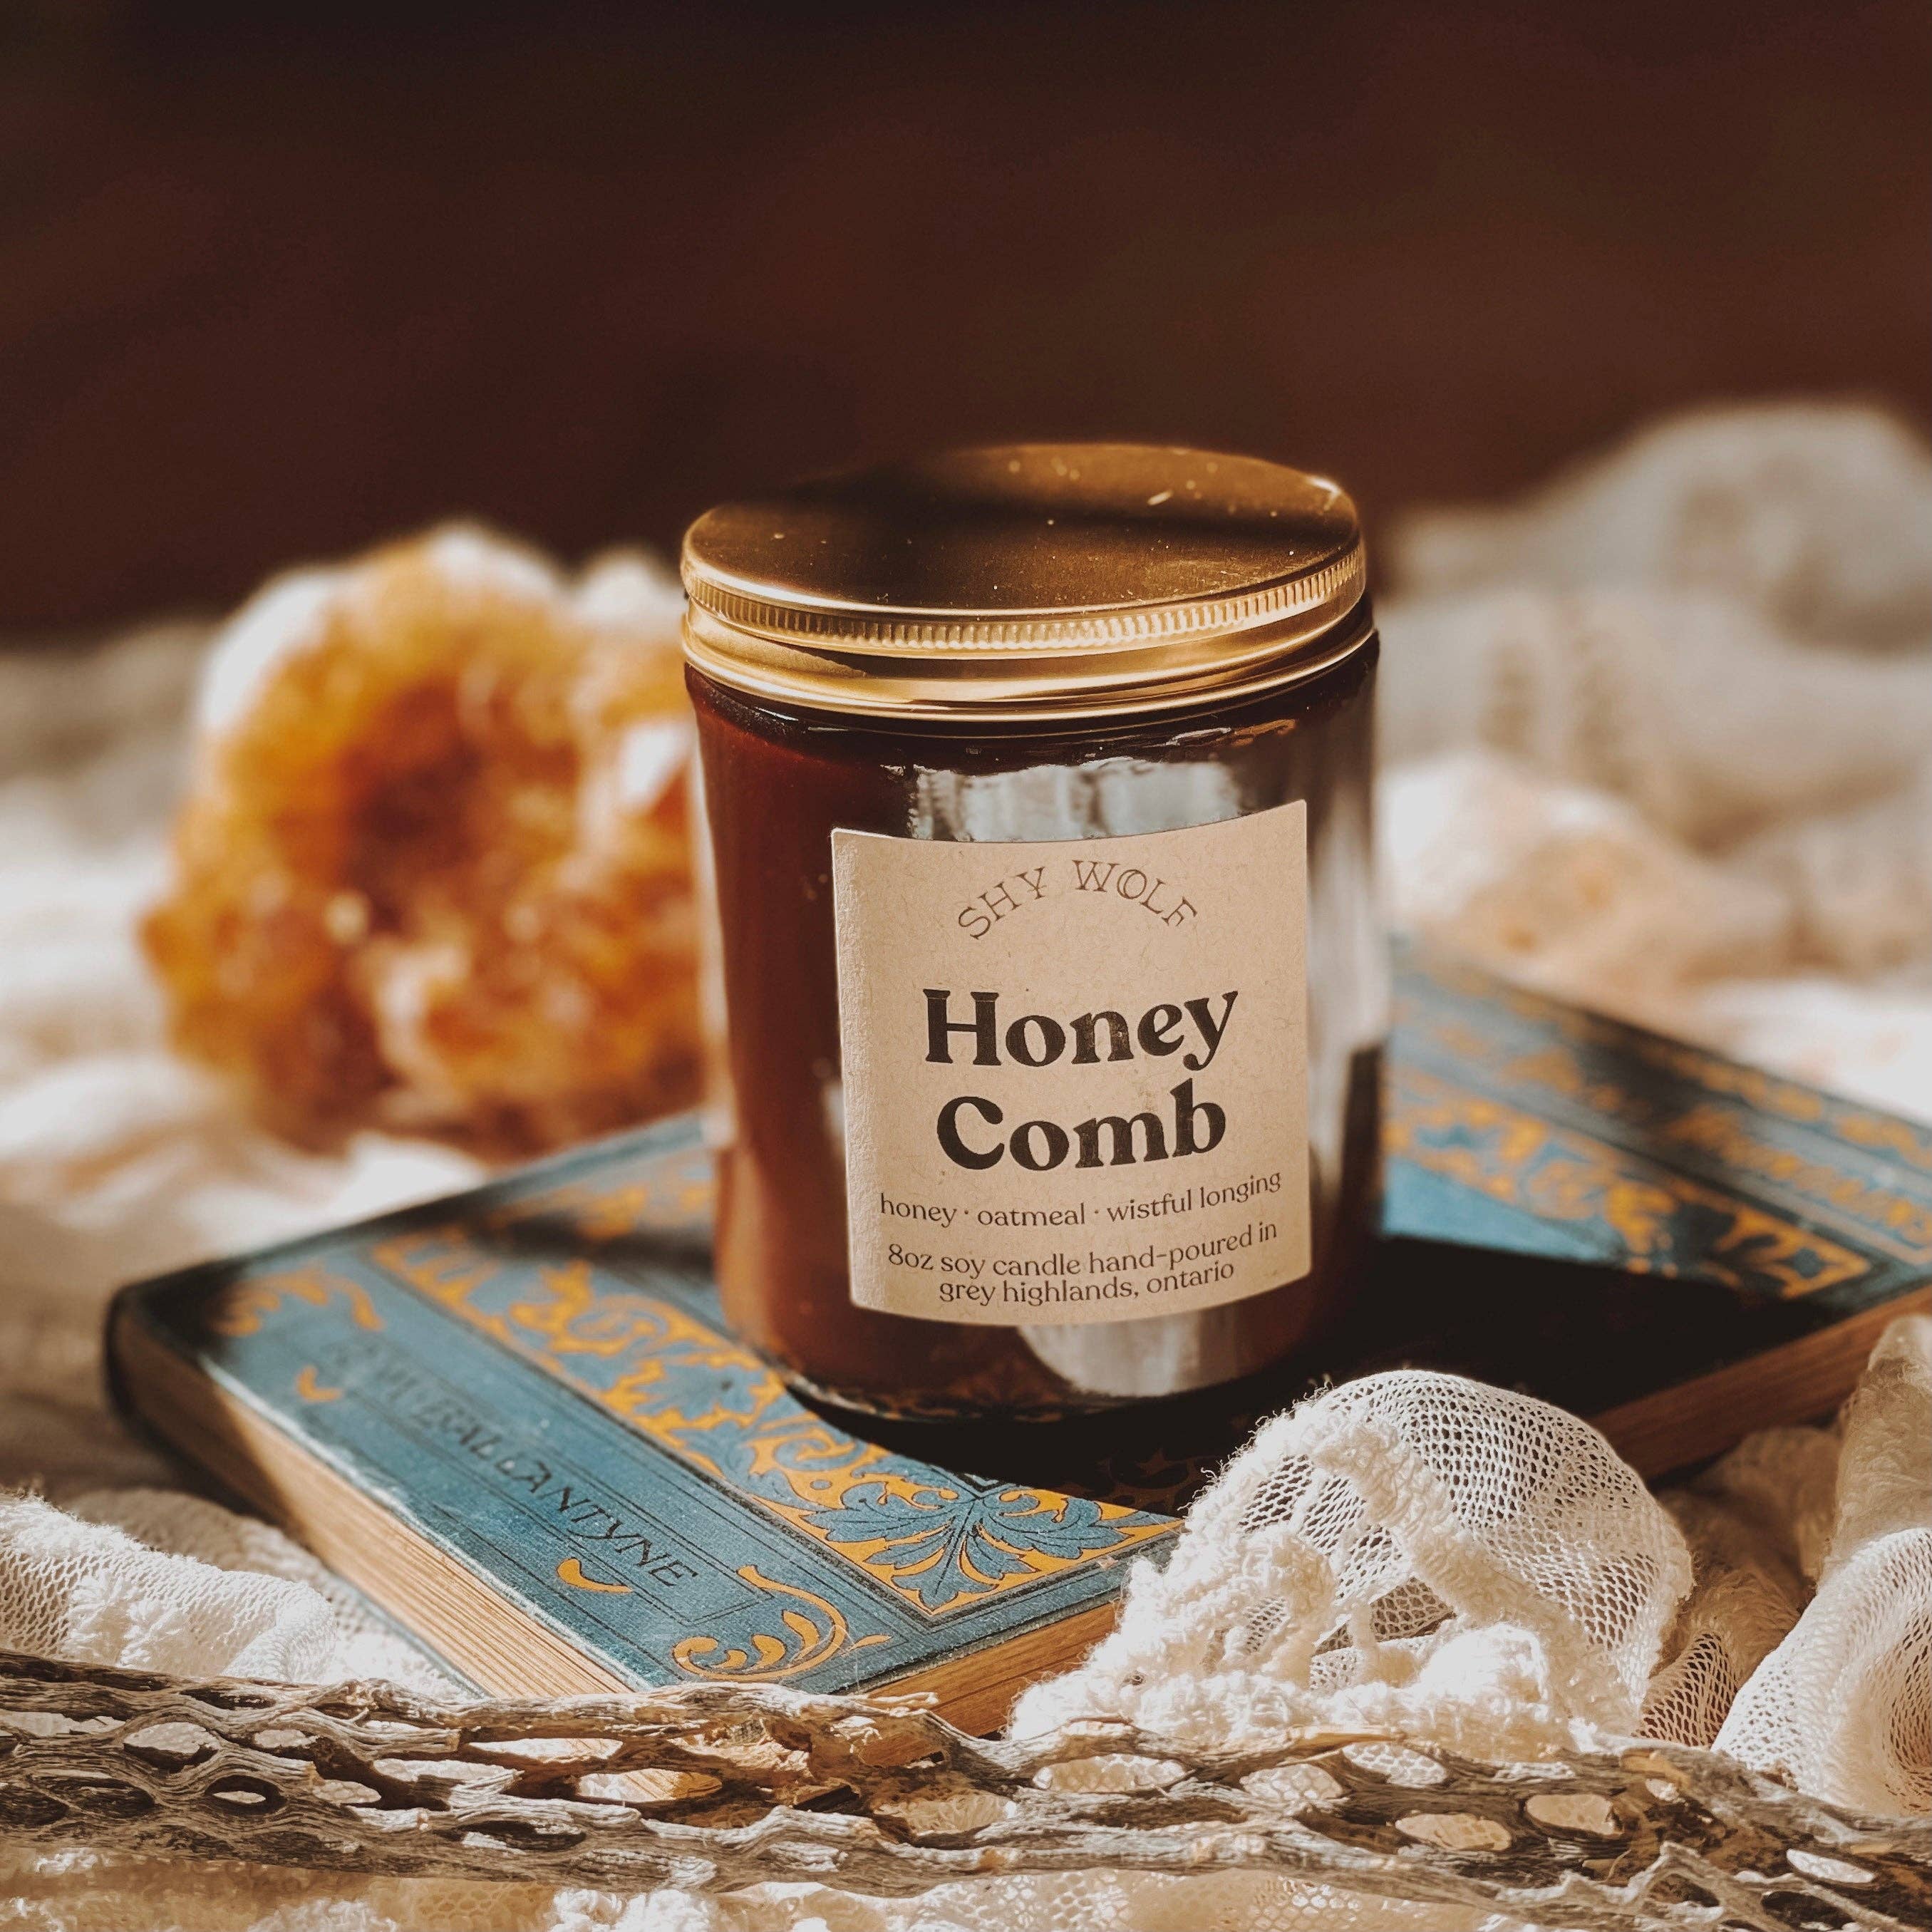 Daisy Jones and the Six Honeycomb Candle - Honey Soy Candle - Out of the Blue